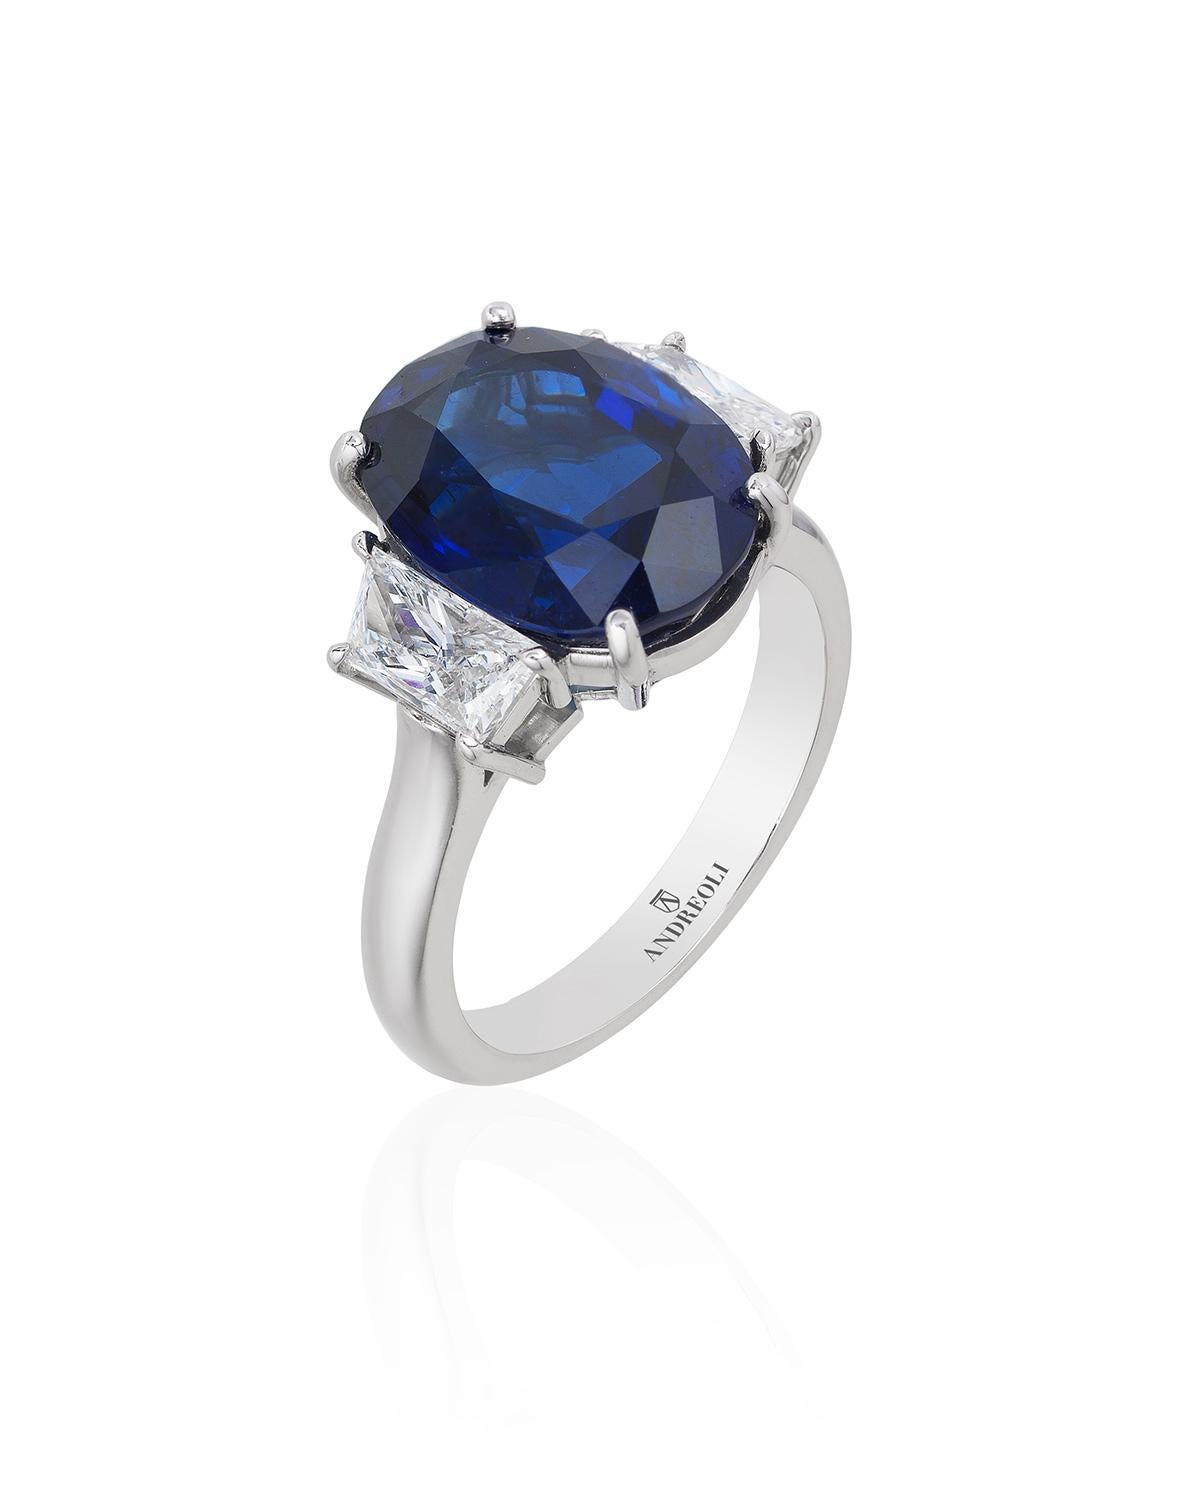 Contemporary Andreoli 7.74 Carat Sapphire Diamond Platinum Ring GIA Certified For Sale